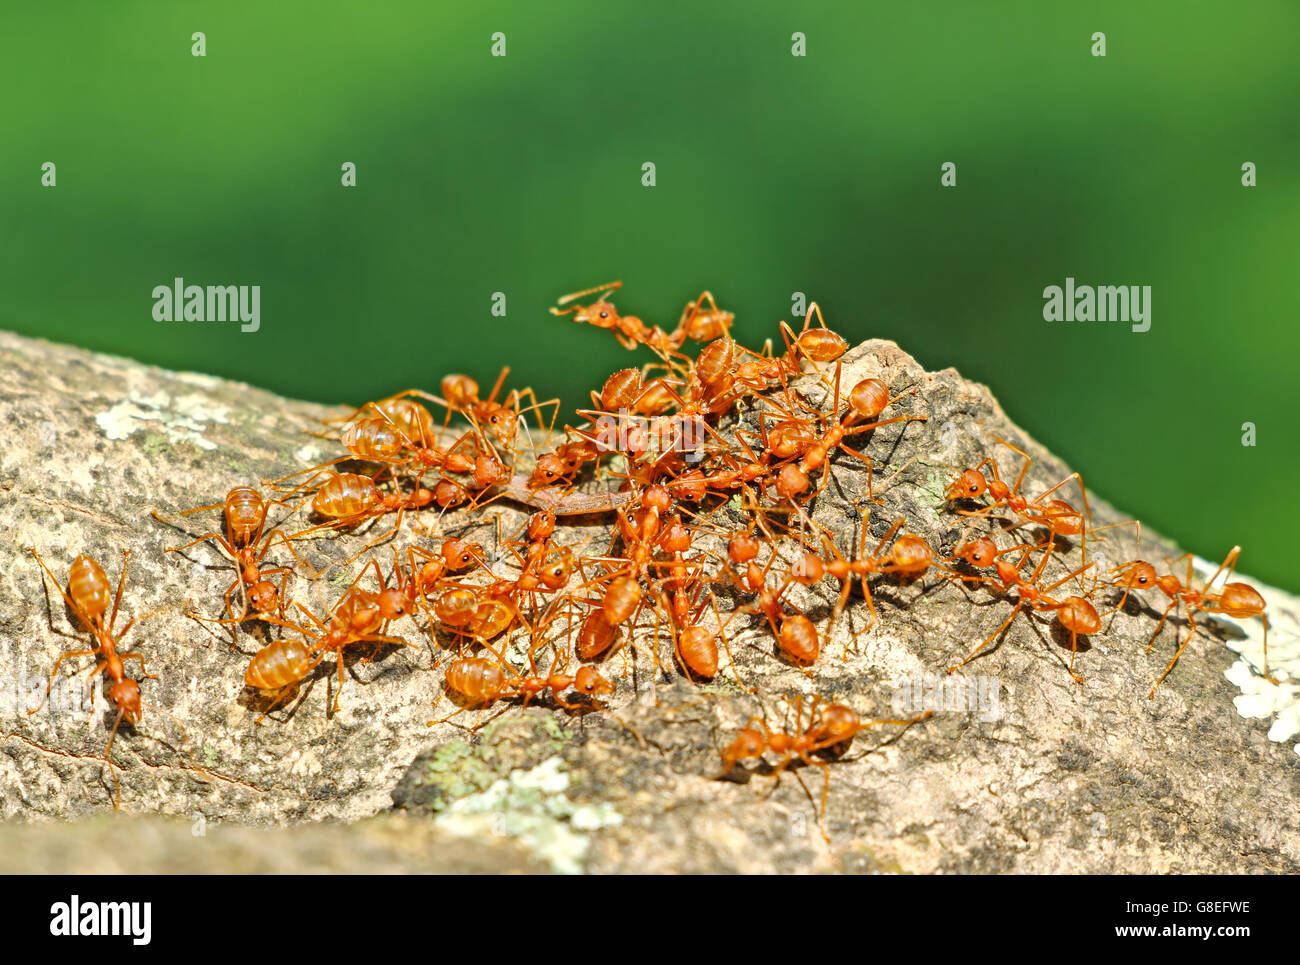 ants cooperating posters